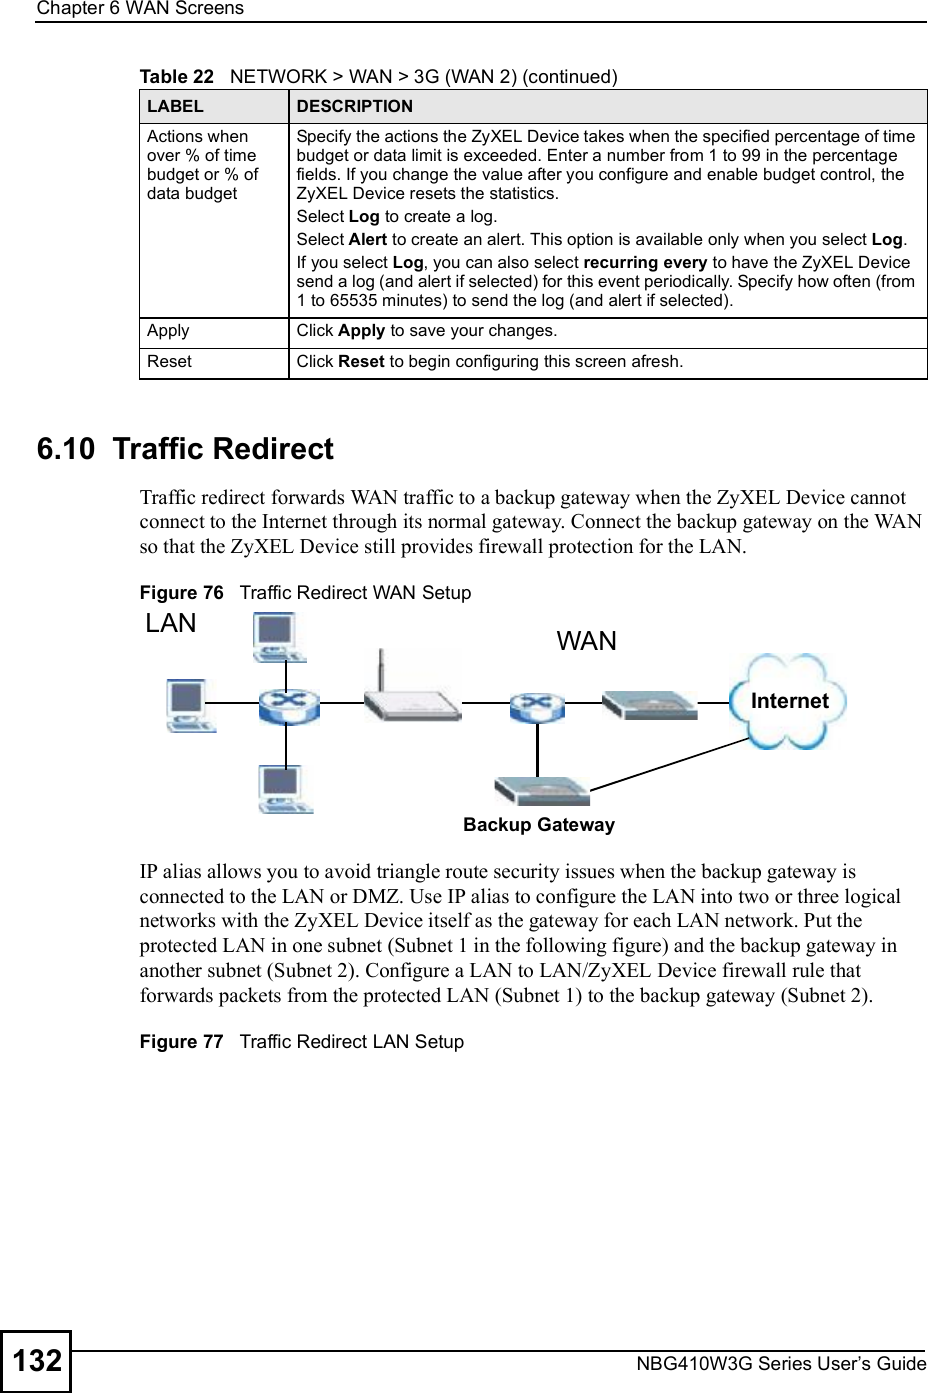 Chapter 6WAN ScreensNBG410W3G Series User s Guide1326.10  Traffic Redirect Traffic redirect forwards WAN traffic to a backup gateway when the ZyXEL Device cannot connect to the Internet through its normal gateway. Connect the backup gateway on the WAN so that the ZyXEL Device still provides firewall protection for the LAN. Figure 76   Traffic Redirect WAN SetupIP alias allows you to avoid triangle route security issues when the backup gateway is connected to the LAN or DMZ. Use IP alias to configure the LAN into two or three logical networks with the ZyXEL Device itself as the gateway for each LAN network. Put the protected LAN in one subnet (Subnet 1 in the following figure) and the backup gateway in another subnet (Subnet 2). Configure a LAN to LAN/ZyXEL Device firewall rule that forwards packets from the protected LAN (Subnet 1) to the backup gateway (Subnet 2). Figure 77   Traffic Redirect LAN SetupActions when over % of time budget or % of data budget Specify the actions the ZyXEL Device takes when the specified percentage of time budget or data limit is exceeded. Enter a number from 1 to 99 in the percentage fields. If you change the value after you configure and enable budget control, the ZyXEL Device resets the statistics.Select Log to create a log.Select Alert to create an alert. This option is available only when you select Log.If you select Log, you can also select recurring every to have the ZyXEL Device send a log (and alert if selected) for this event periodically. Specify how often (from 1 to 65535 minutes) to send the log (and alert if selected).ApplyClick Apply to save your changes.ResetClick Reset to begin configuring this screen afresh.Table 22   NETWORK &gt; WAN &gt; 3G (WAN 2) (continued)LABEL DESCRIPTIONInternetWANLANBackup Gateway